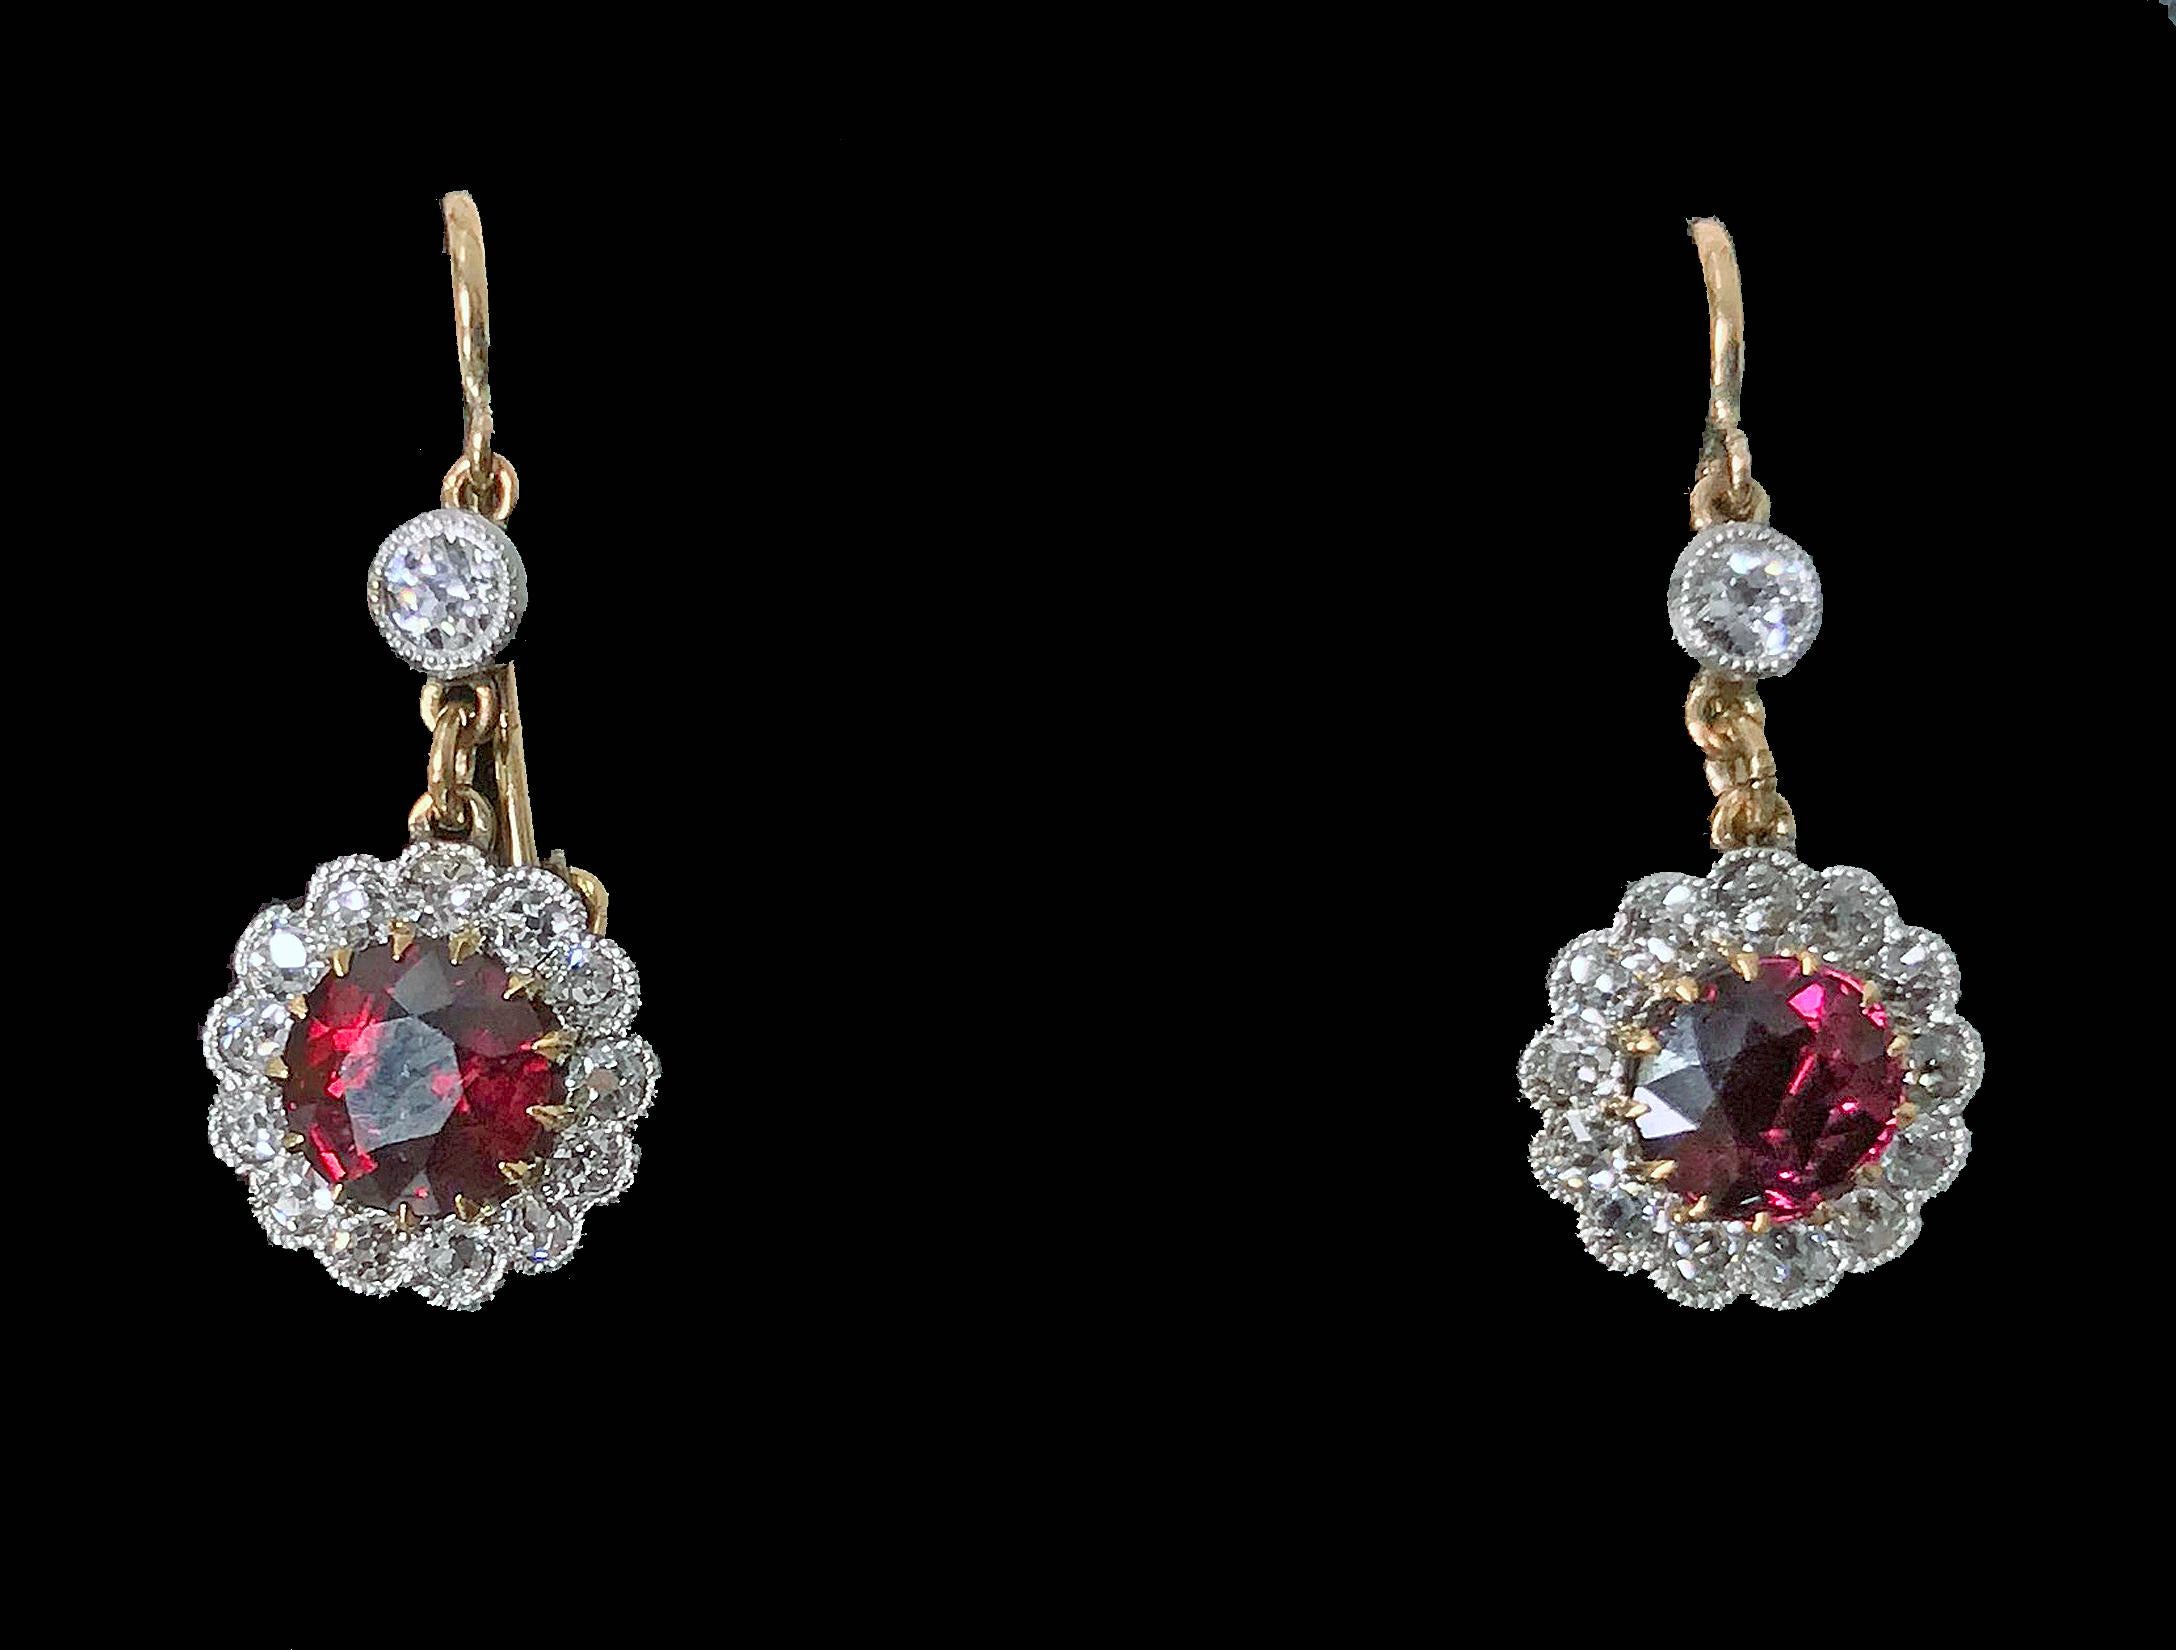 Pair of Antique Ruby and Diamond Gold and Platinum Earrings, C.1920. Each suspending a round facetted purplish Red Ruby, approximately 0.75 ct each, average VS2-SI1 clarity (type 11) with a milligrain set surround of 13 old mine cut diamonds